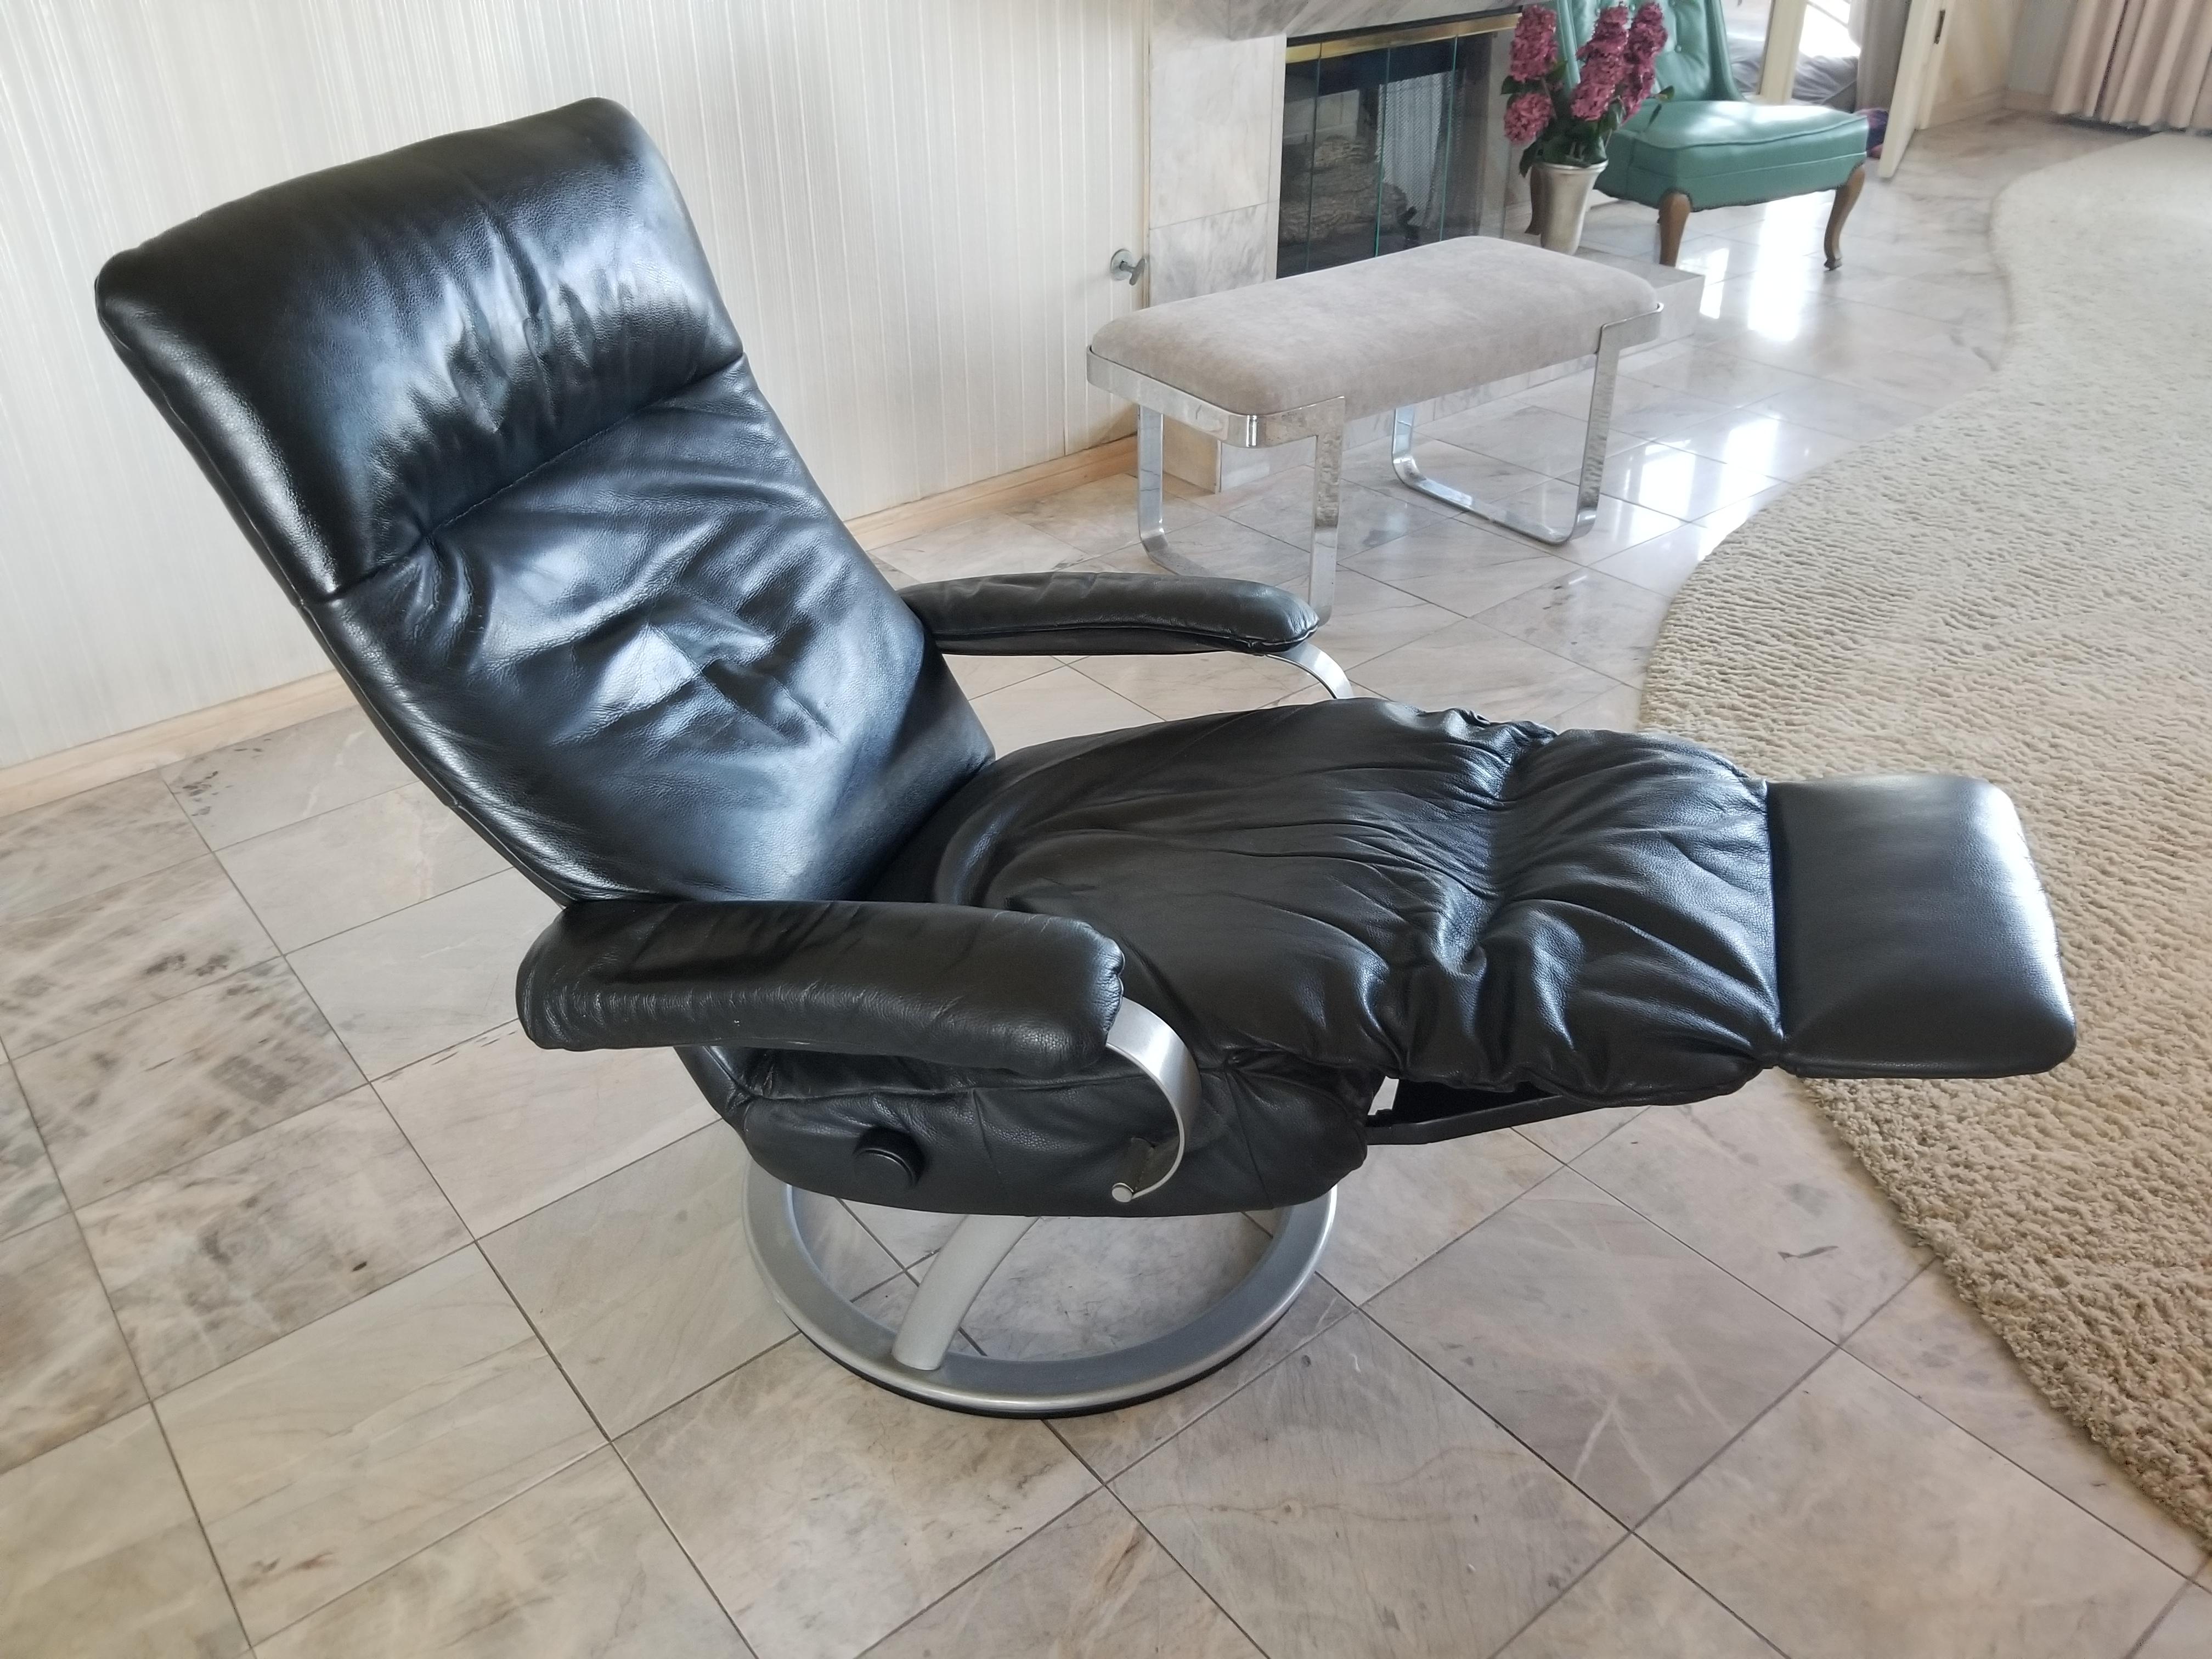 Percival Lafer Leather Recliner Kiri Swivel Ergonomic Vintage Modern Lounge Chair Brazil
Approximately 39 t x 29 w x 29/67 D Seat h 18 Arm h 20
Retractable footrest remains totally invisible when closed. 
Recline from upright position. Armrests